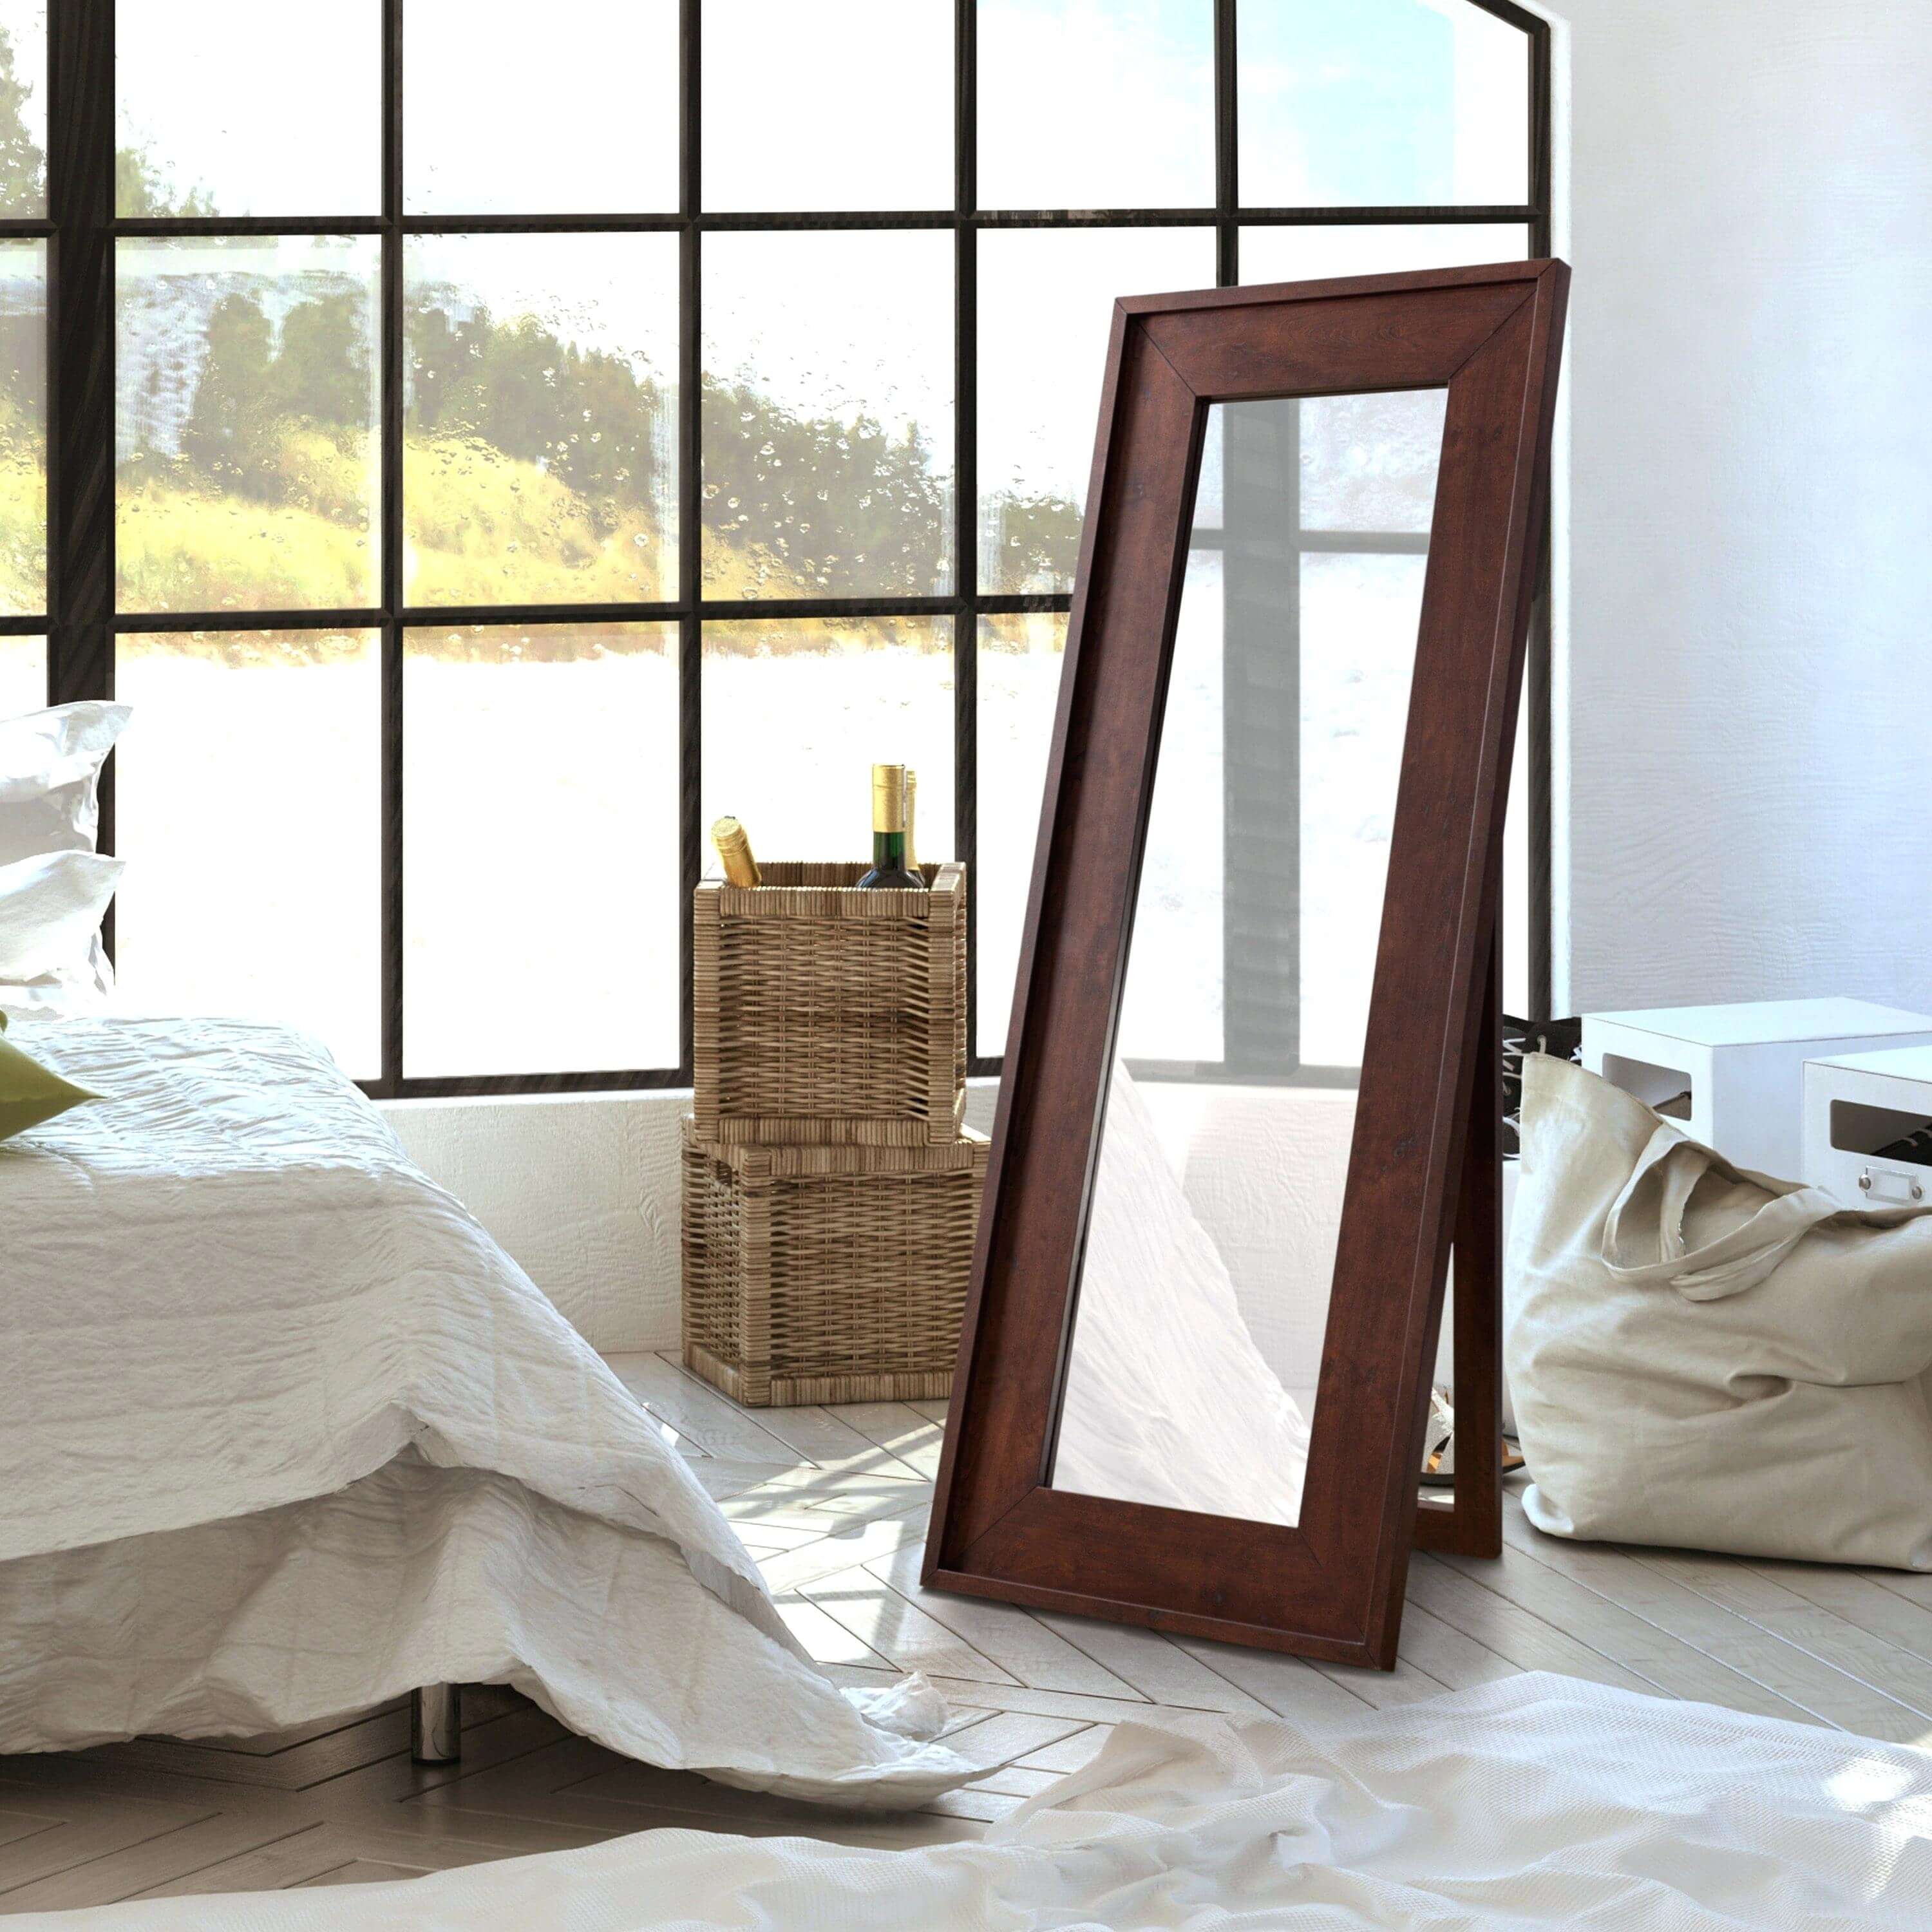 A large mirror sitting on top of a bed next to a window
